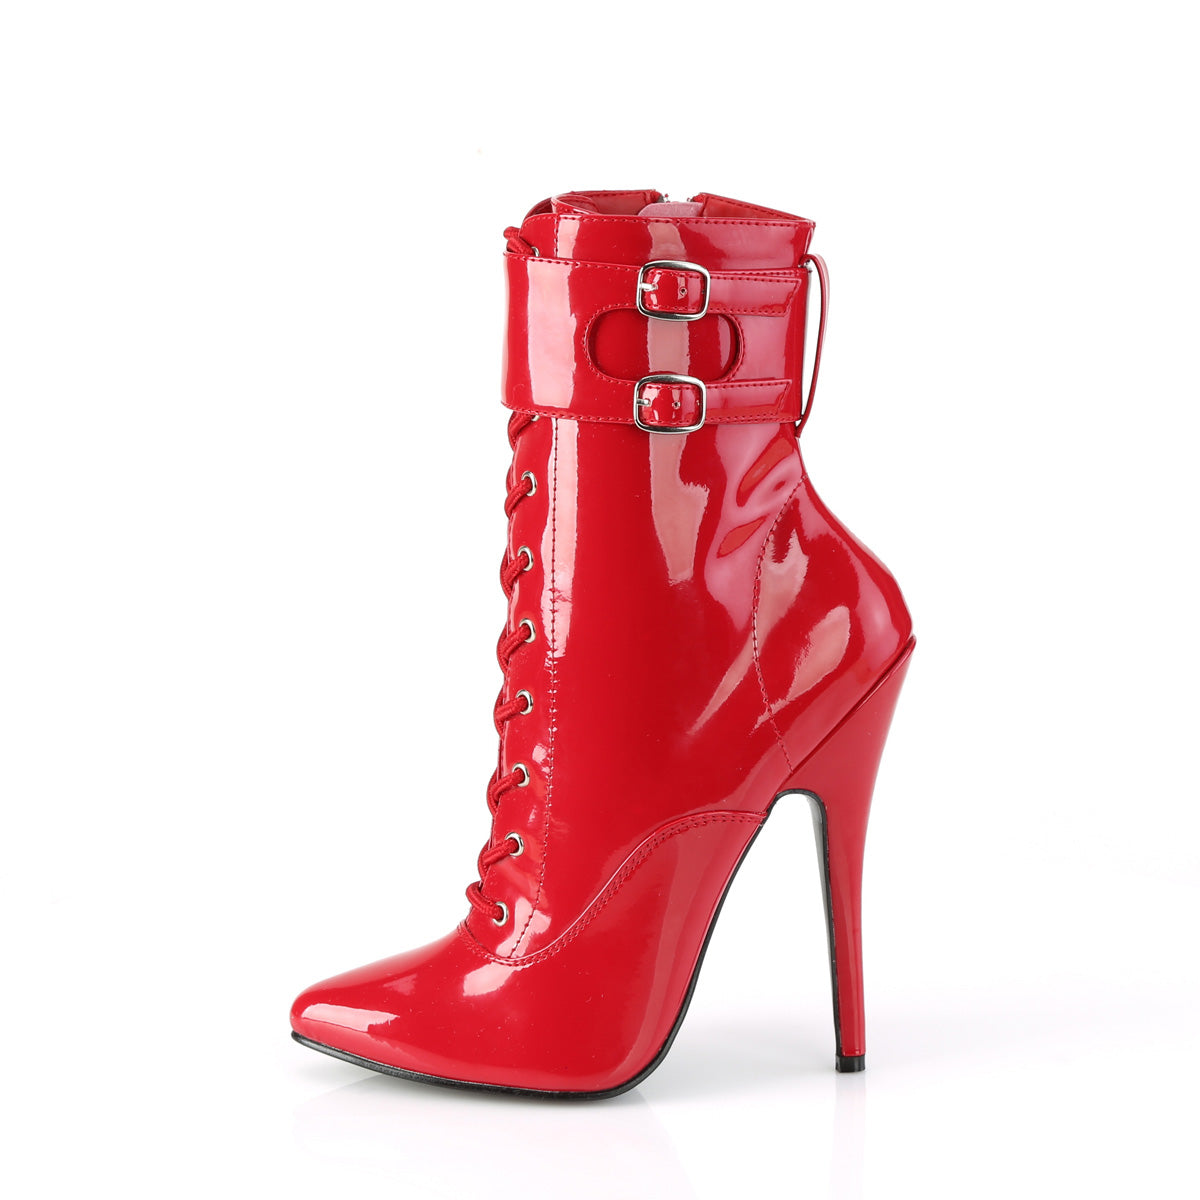 DOMINA-1023 Red Ankle Boots